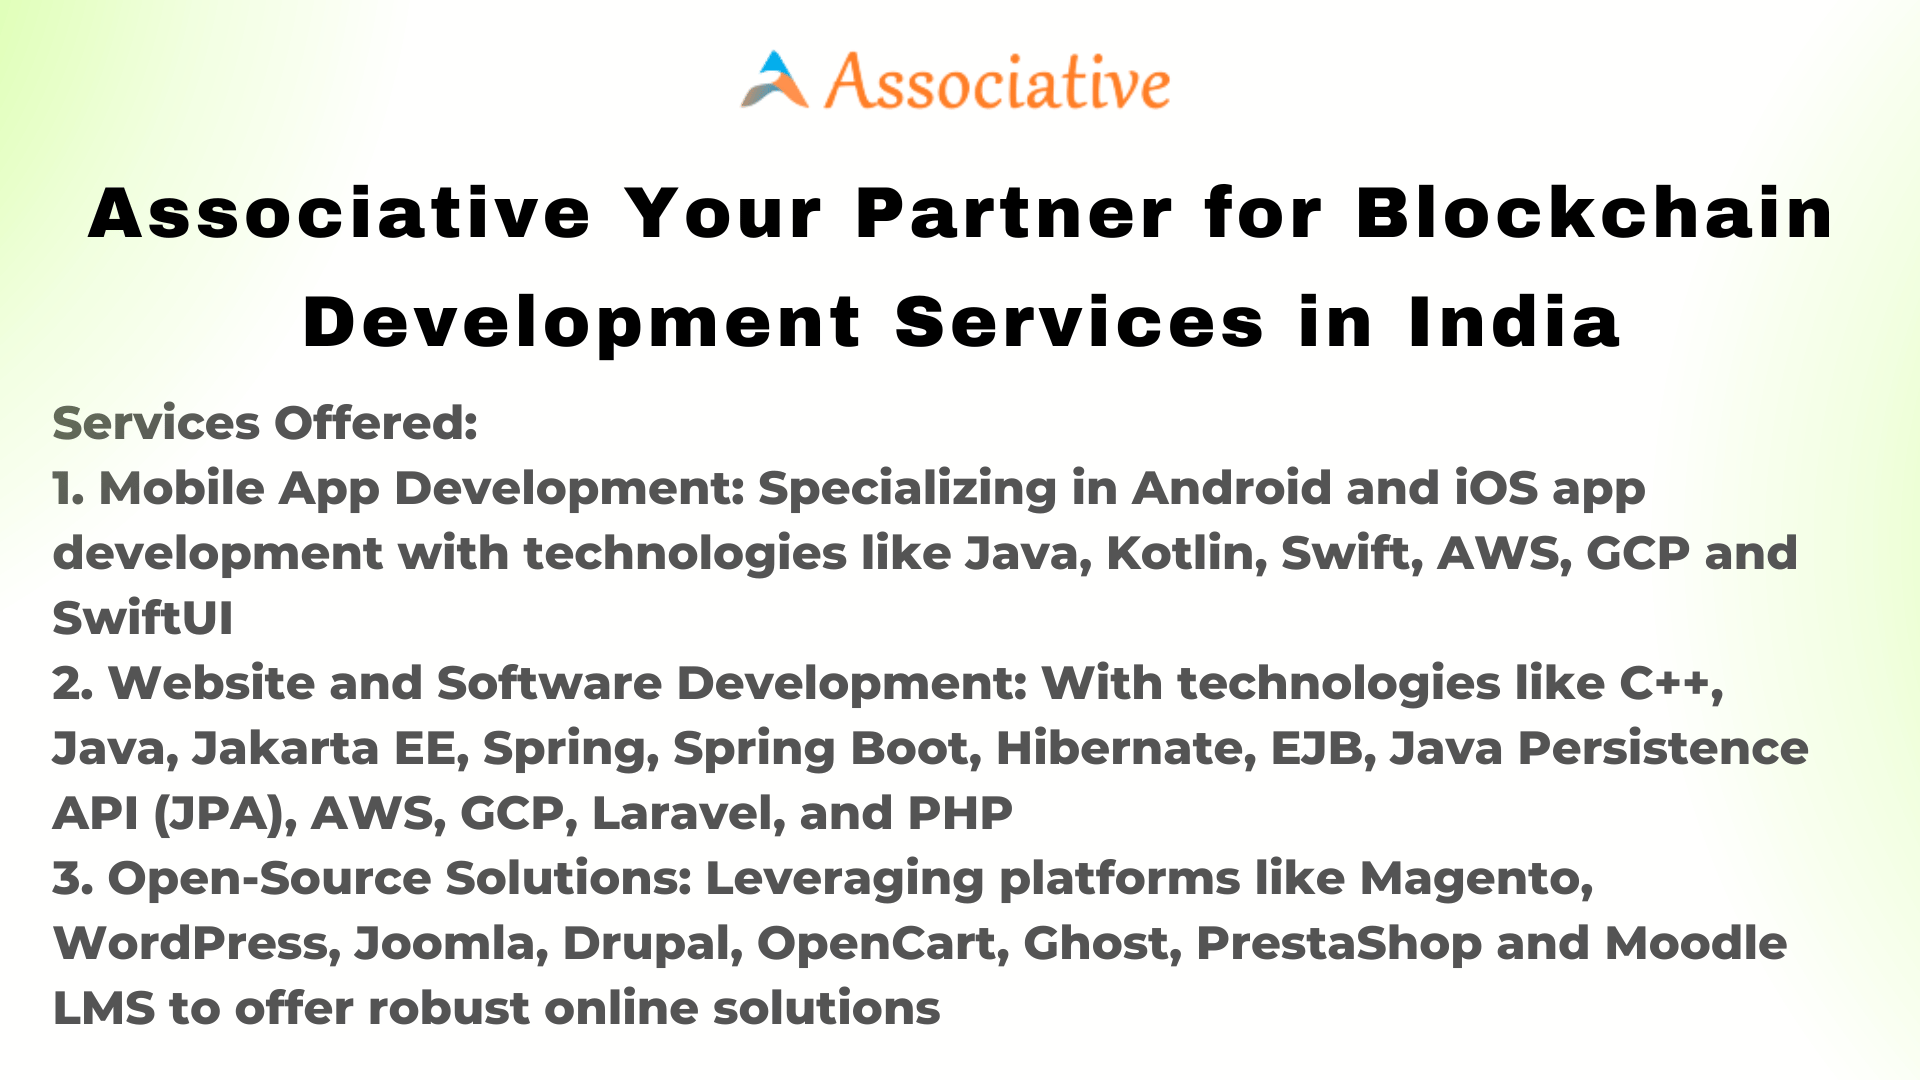 Associative Your Partner for Blockchain Development Services in India